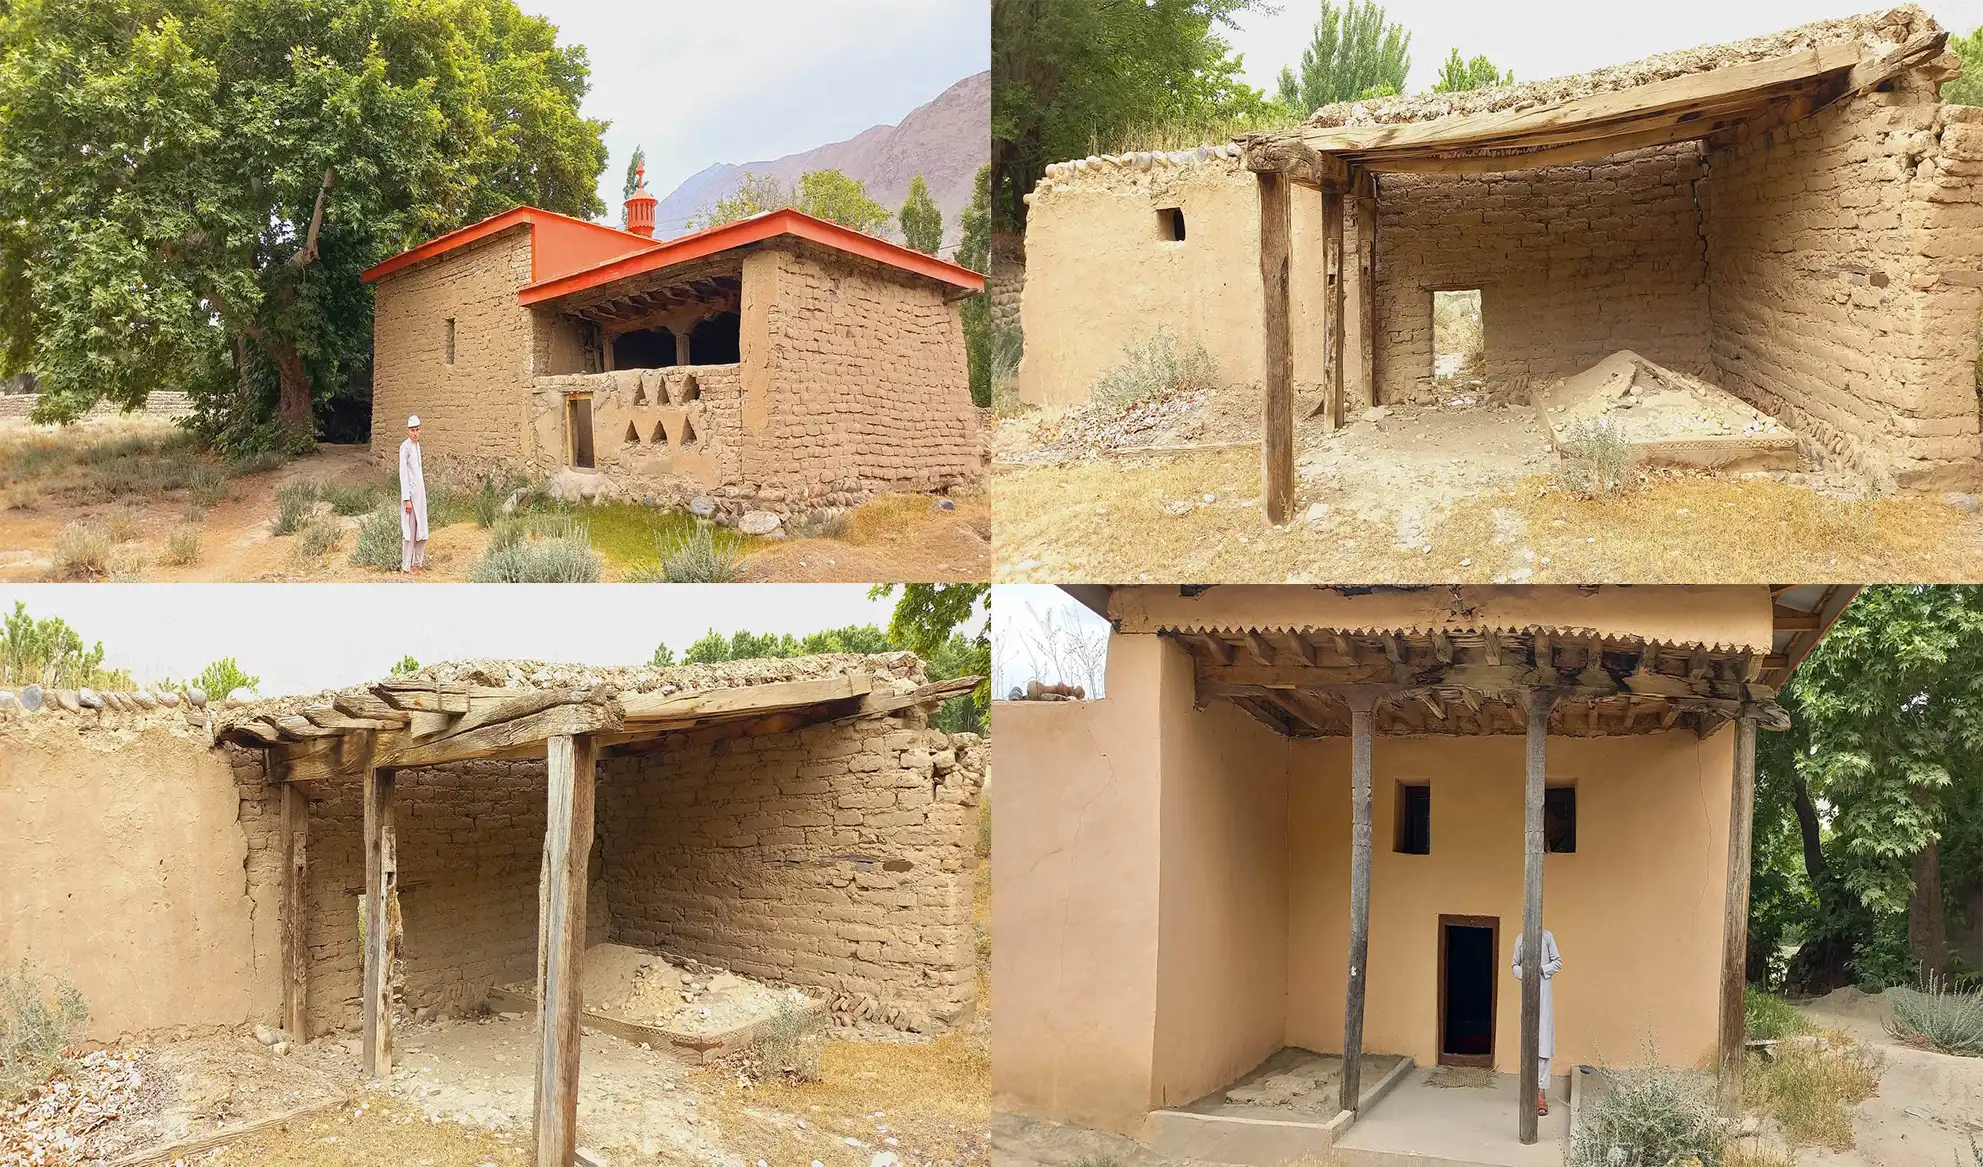 Sheikh Khalilullah Wali’s historic site on verge of collapse